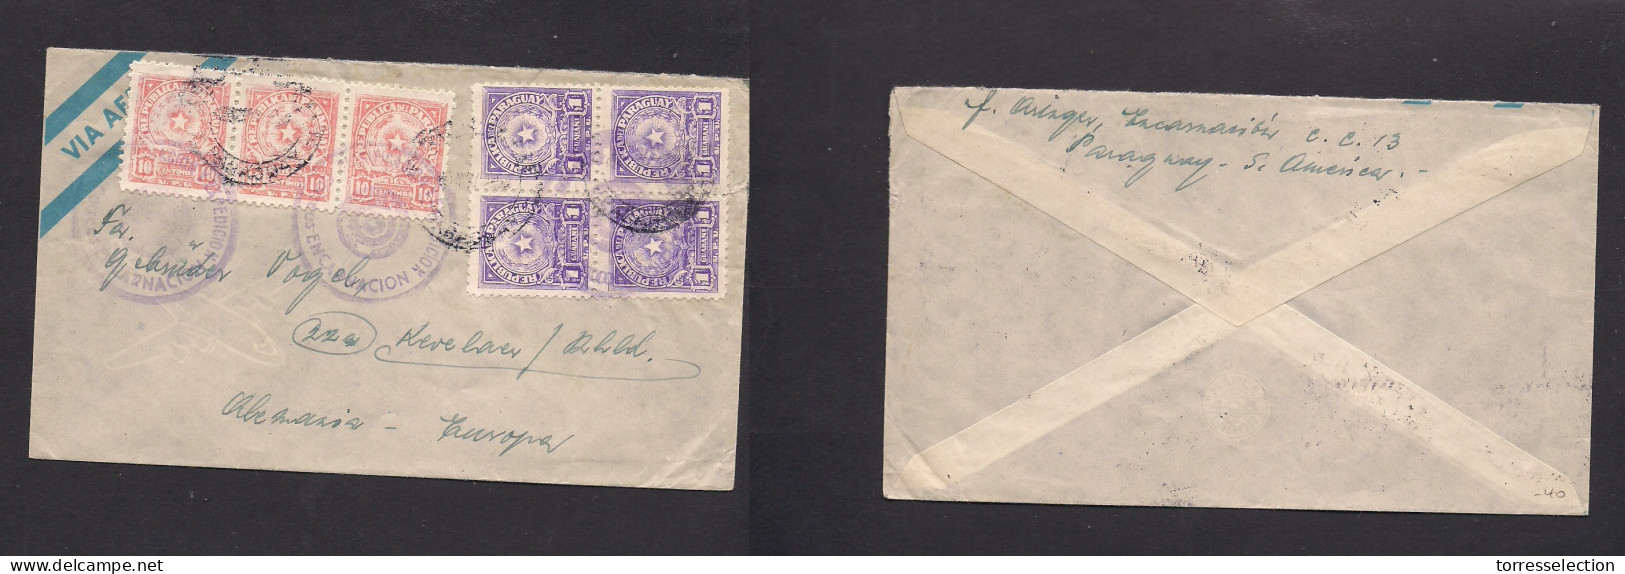 PARAGUAY. 1954. Encarnacion - Germany, Kevelaer. Air Multifkd Env, With Lilac Provisional Cachets. Fine Usage. - Paraguay